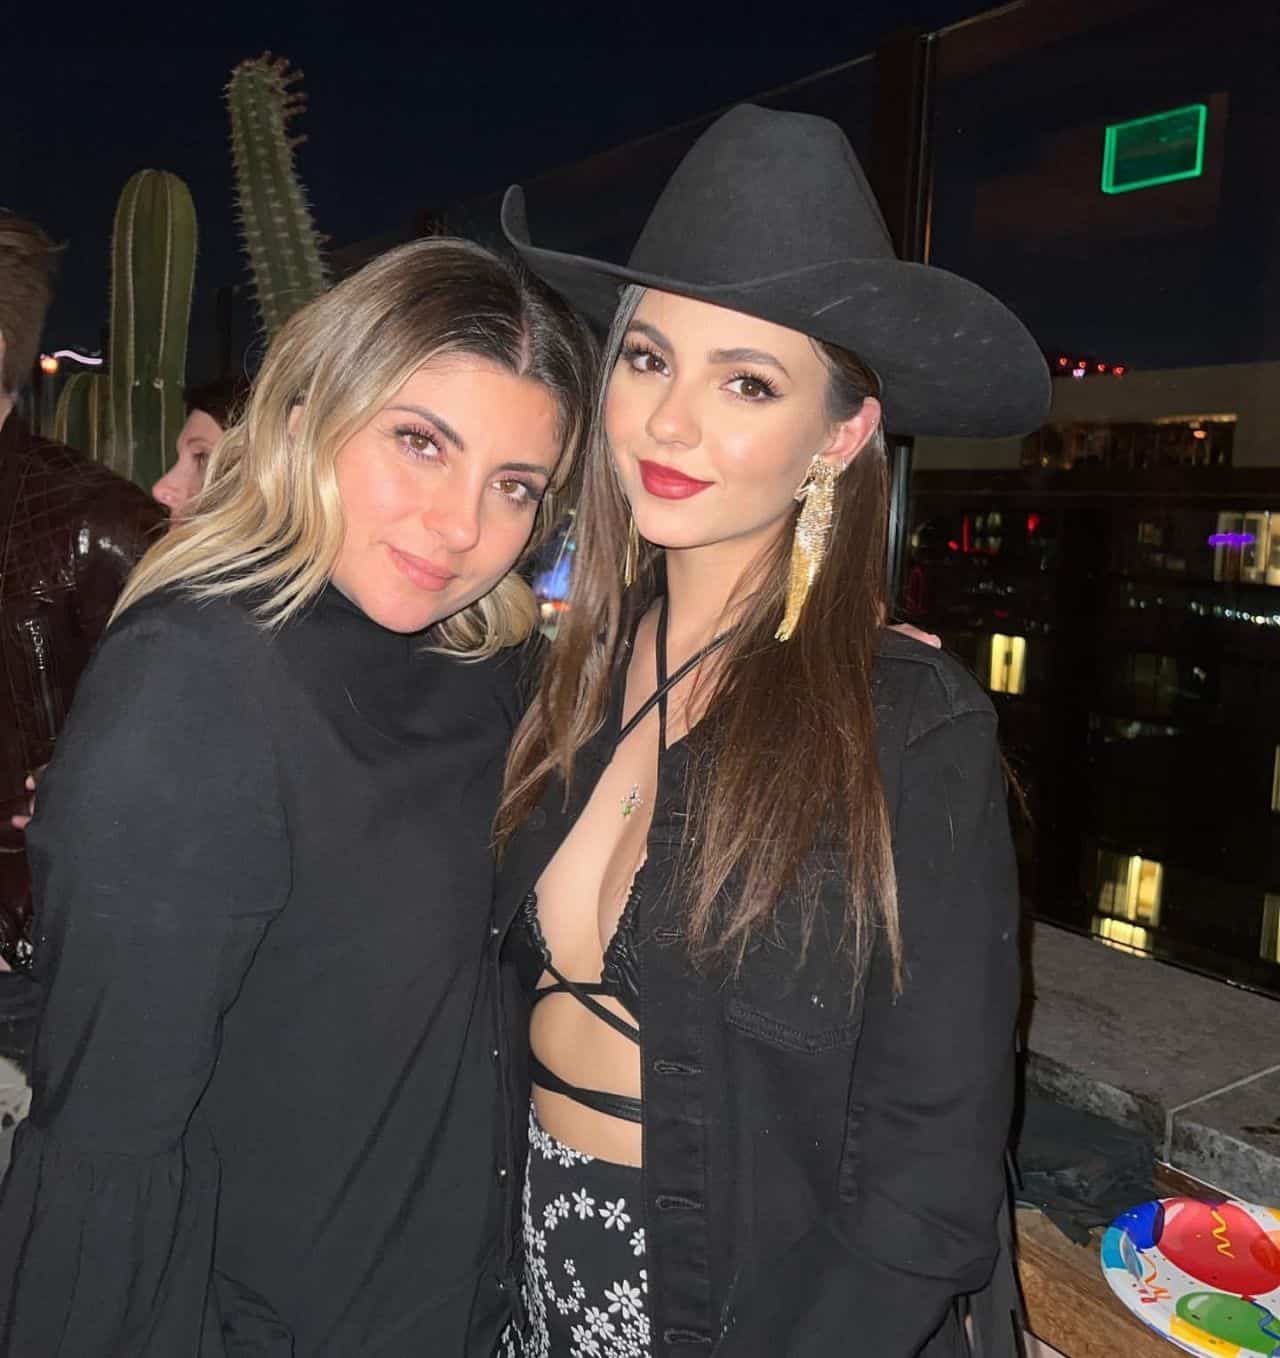 Victoria Justice Celebrated her 29th Birthday Wearing a Daring Cowgirl Look